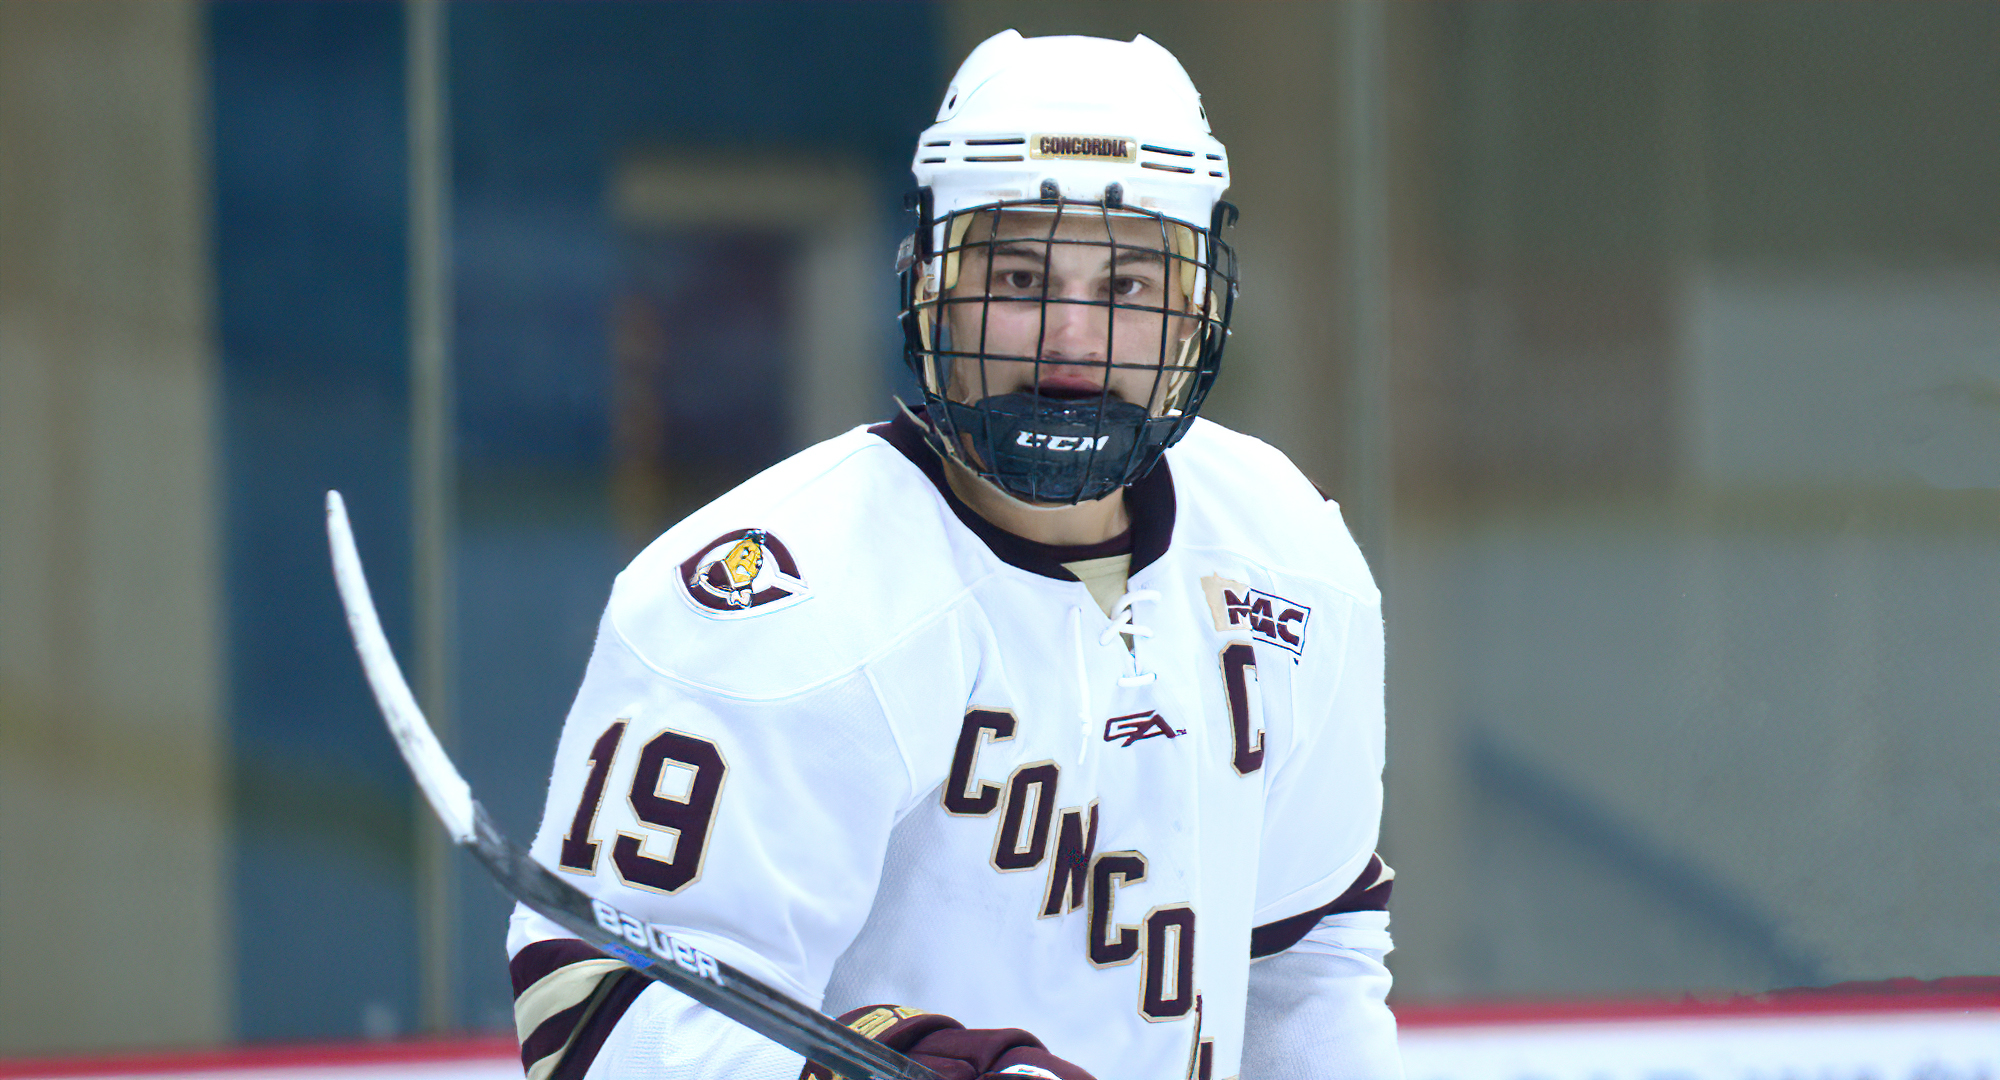 Senior Tyler Bossert has 98 career points and is closing on becoming the first 100-point scorer for the Cobbers since the late 1990's.